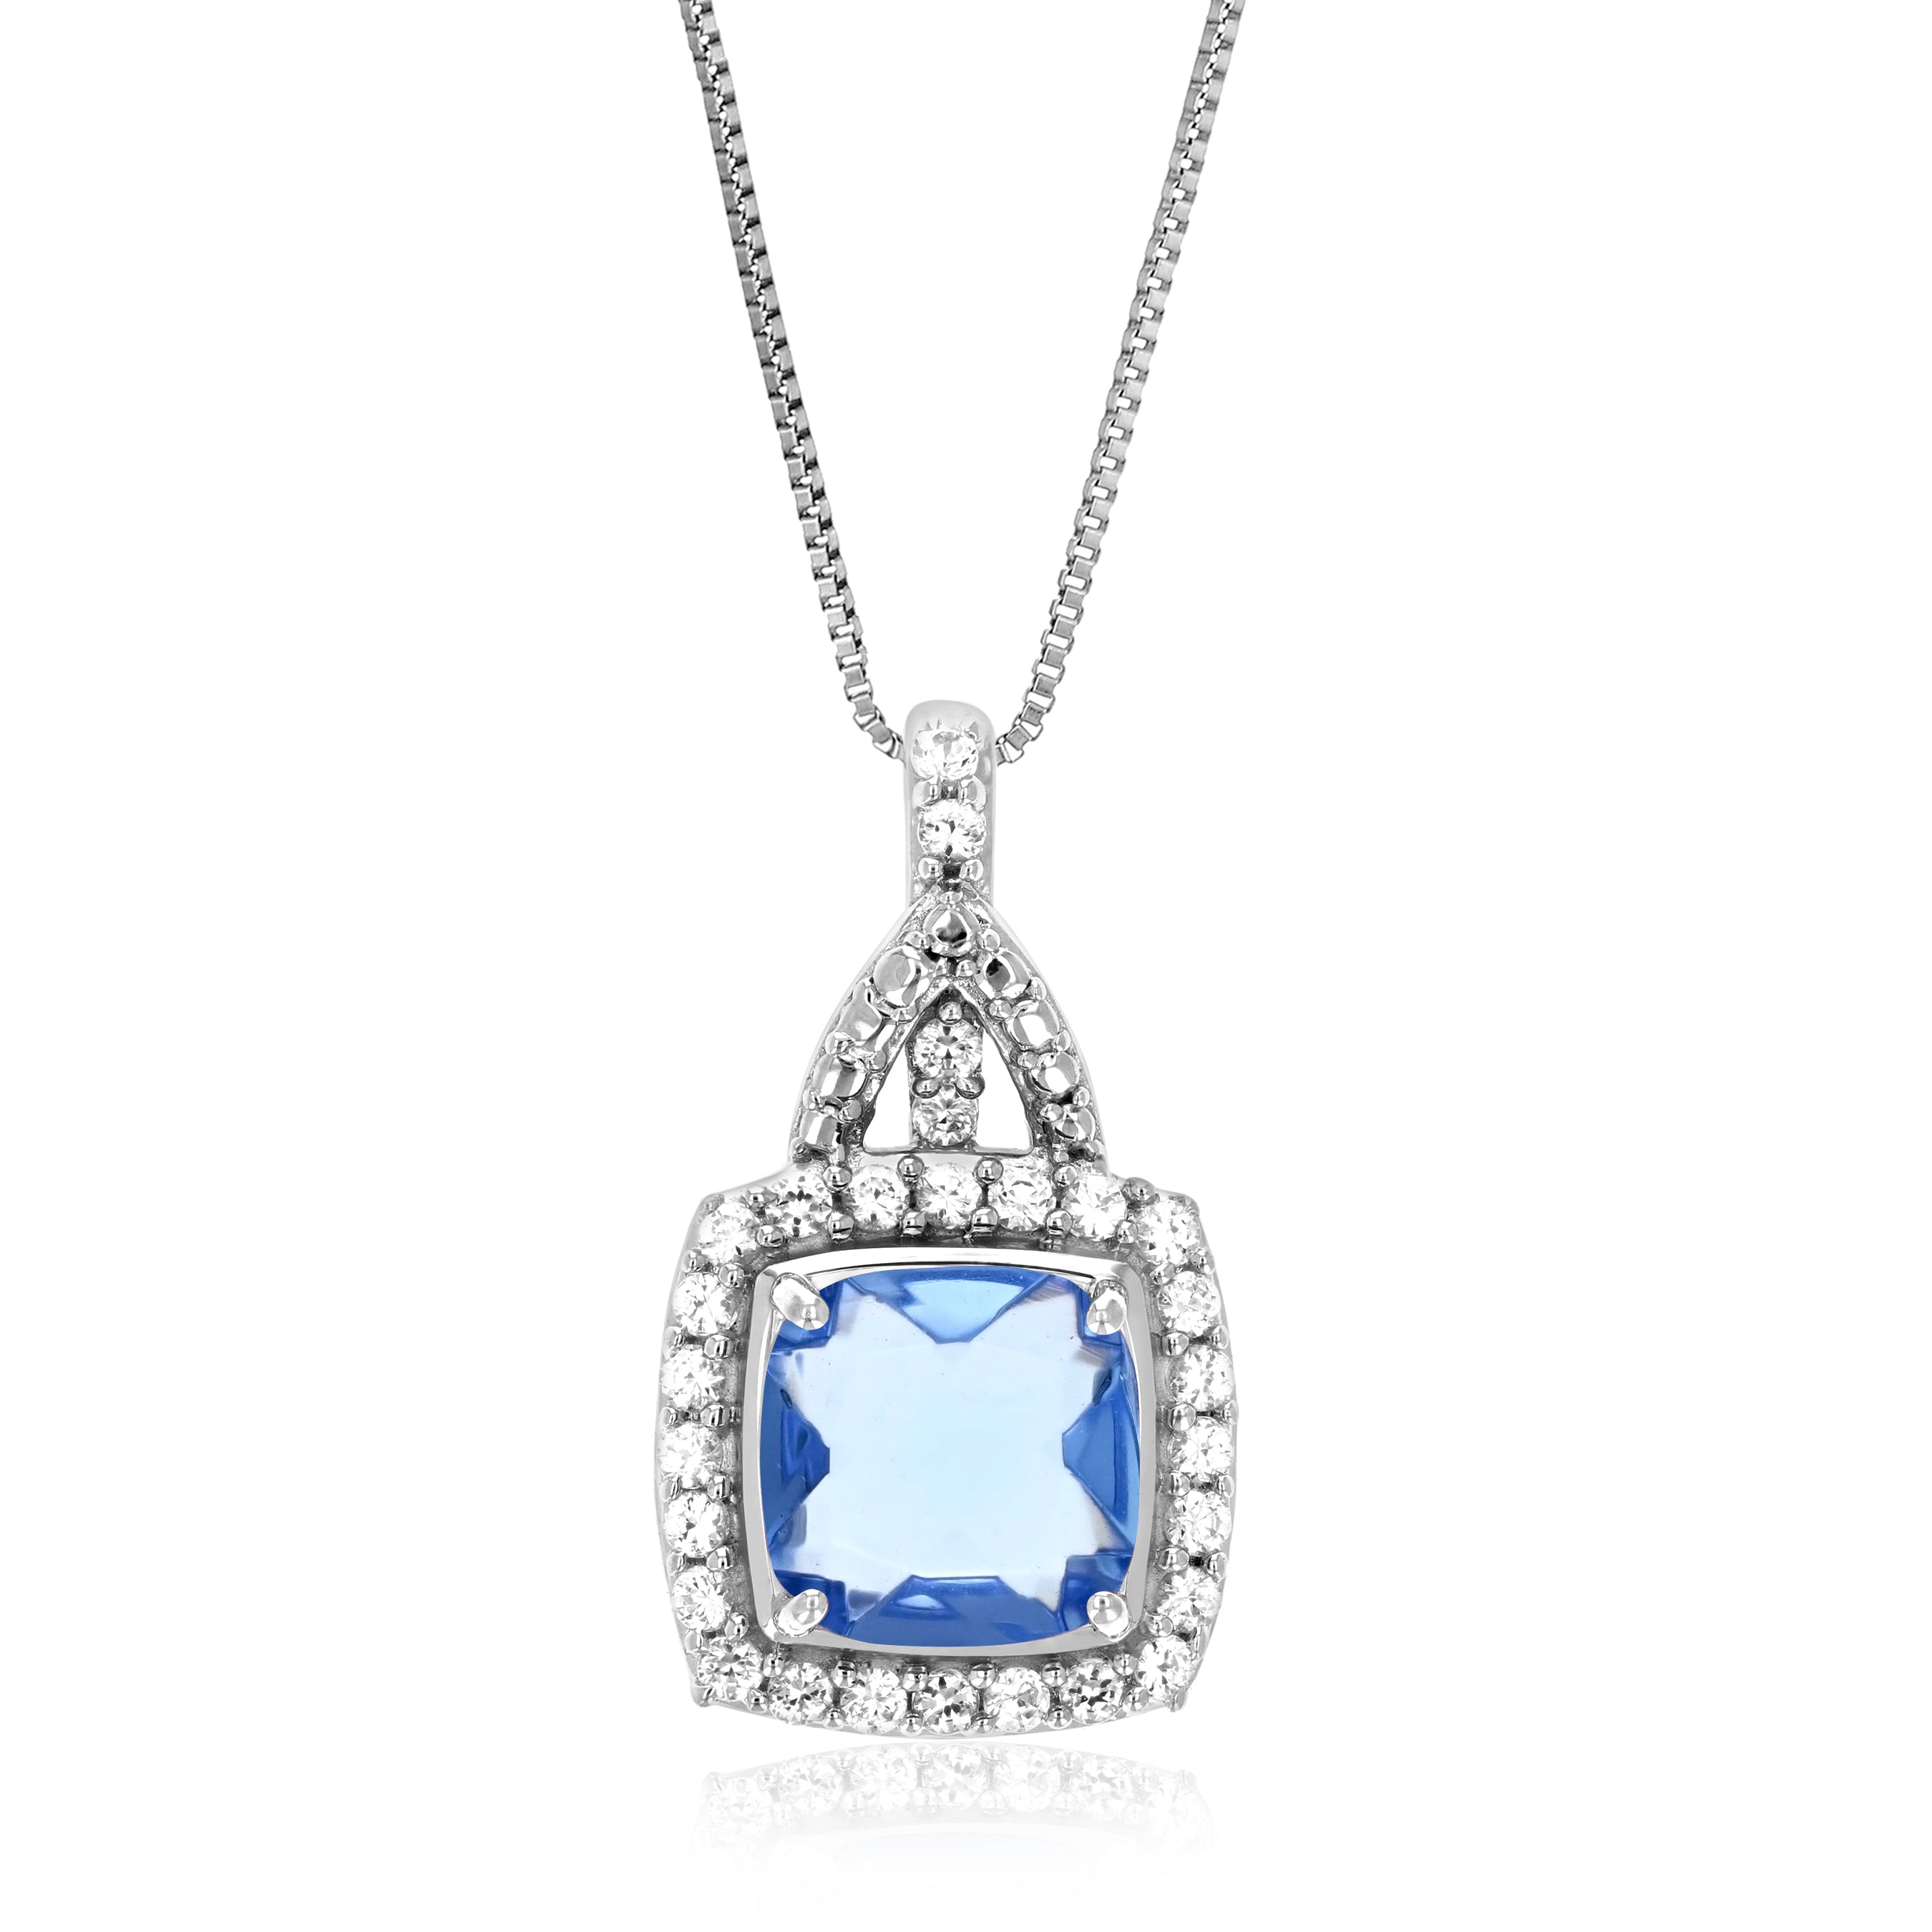 1.50 cttw Cushion Cut Created Aquamarine Pendant .925 Sterling Silver with Chain